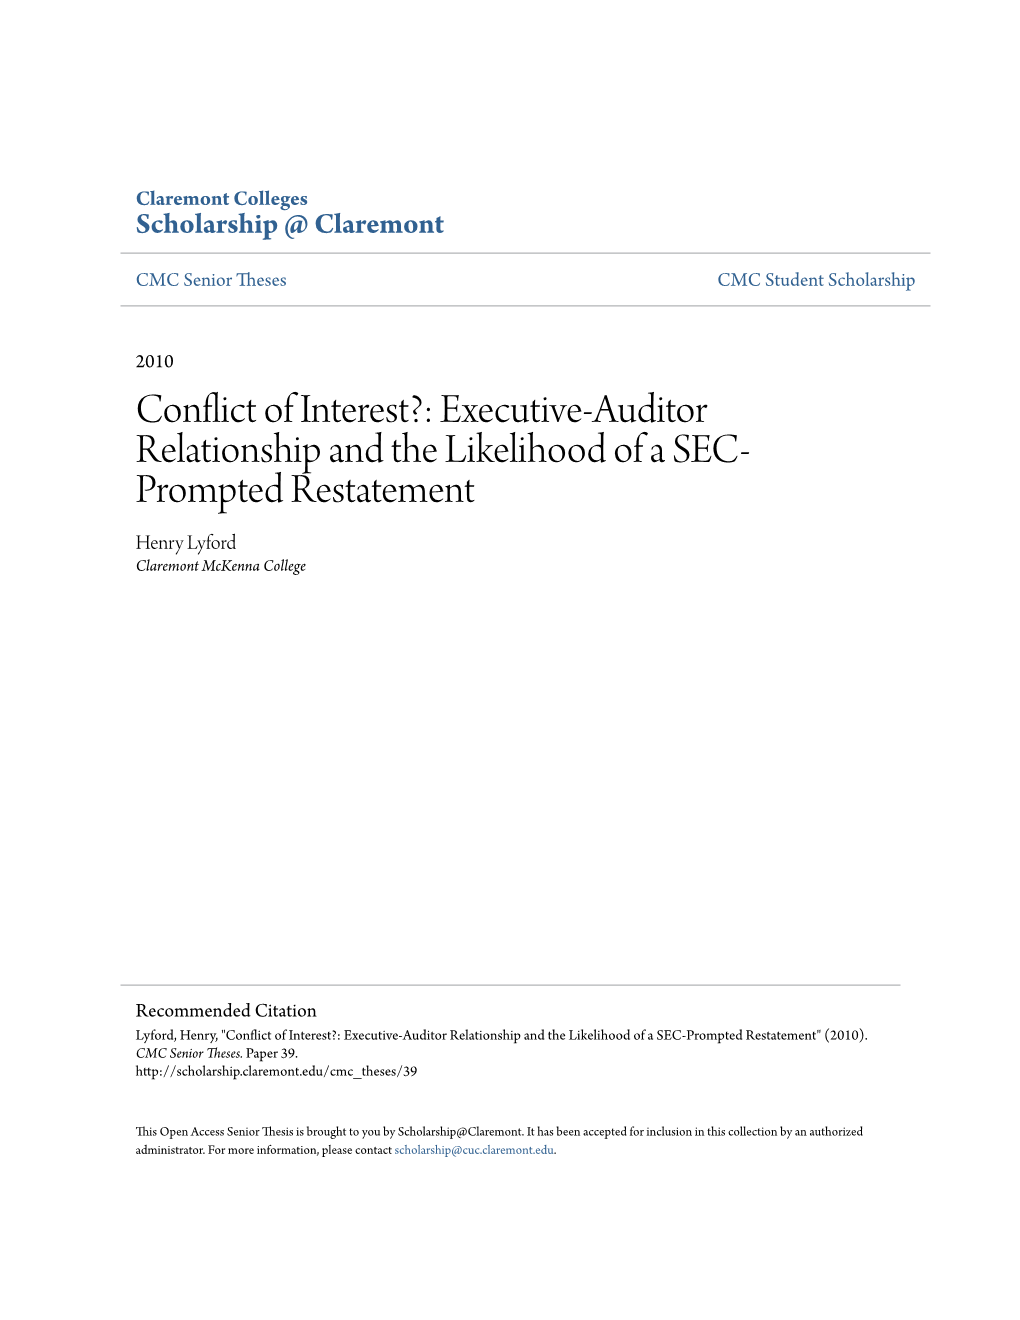 Conflict of Interest?: Executive-Auditor Relationship and the Likelihood of a SEC- Prompted Restatement Henry Lyford Claremont Mckenna College